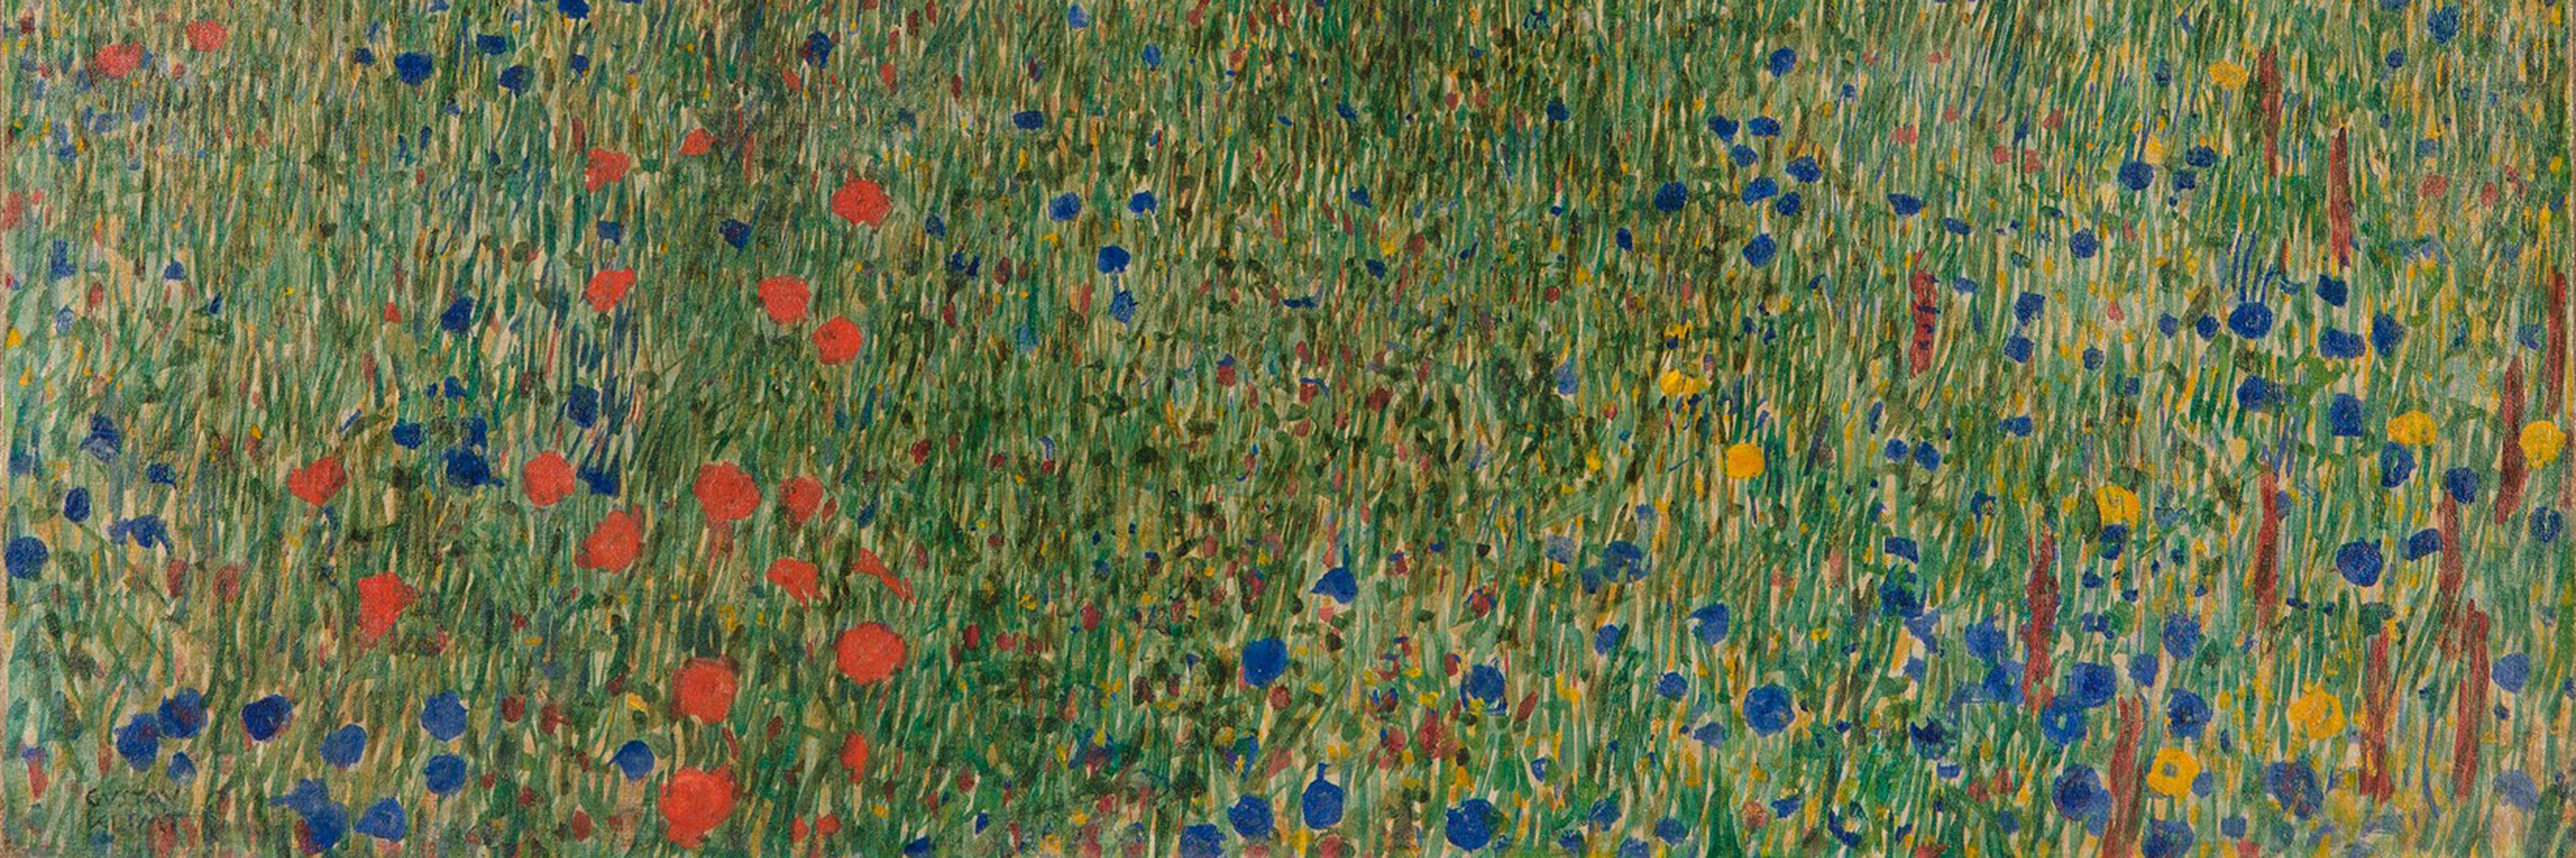 A painting of a field of flowers.